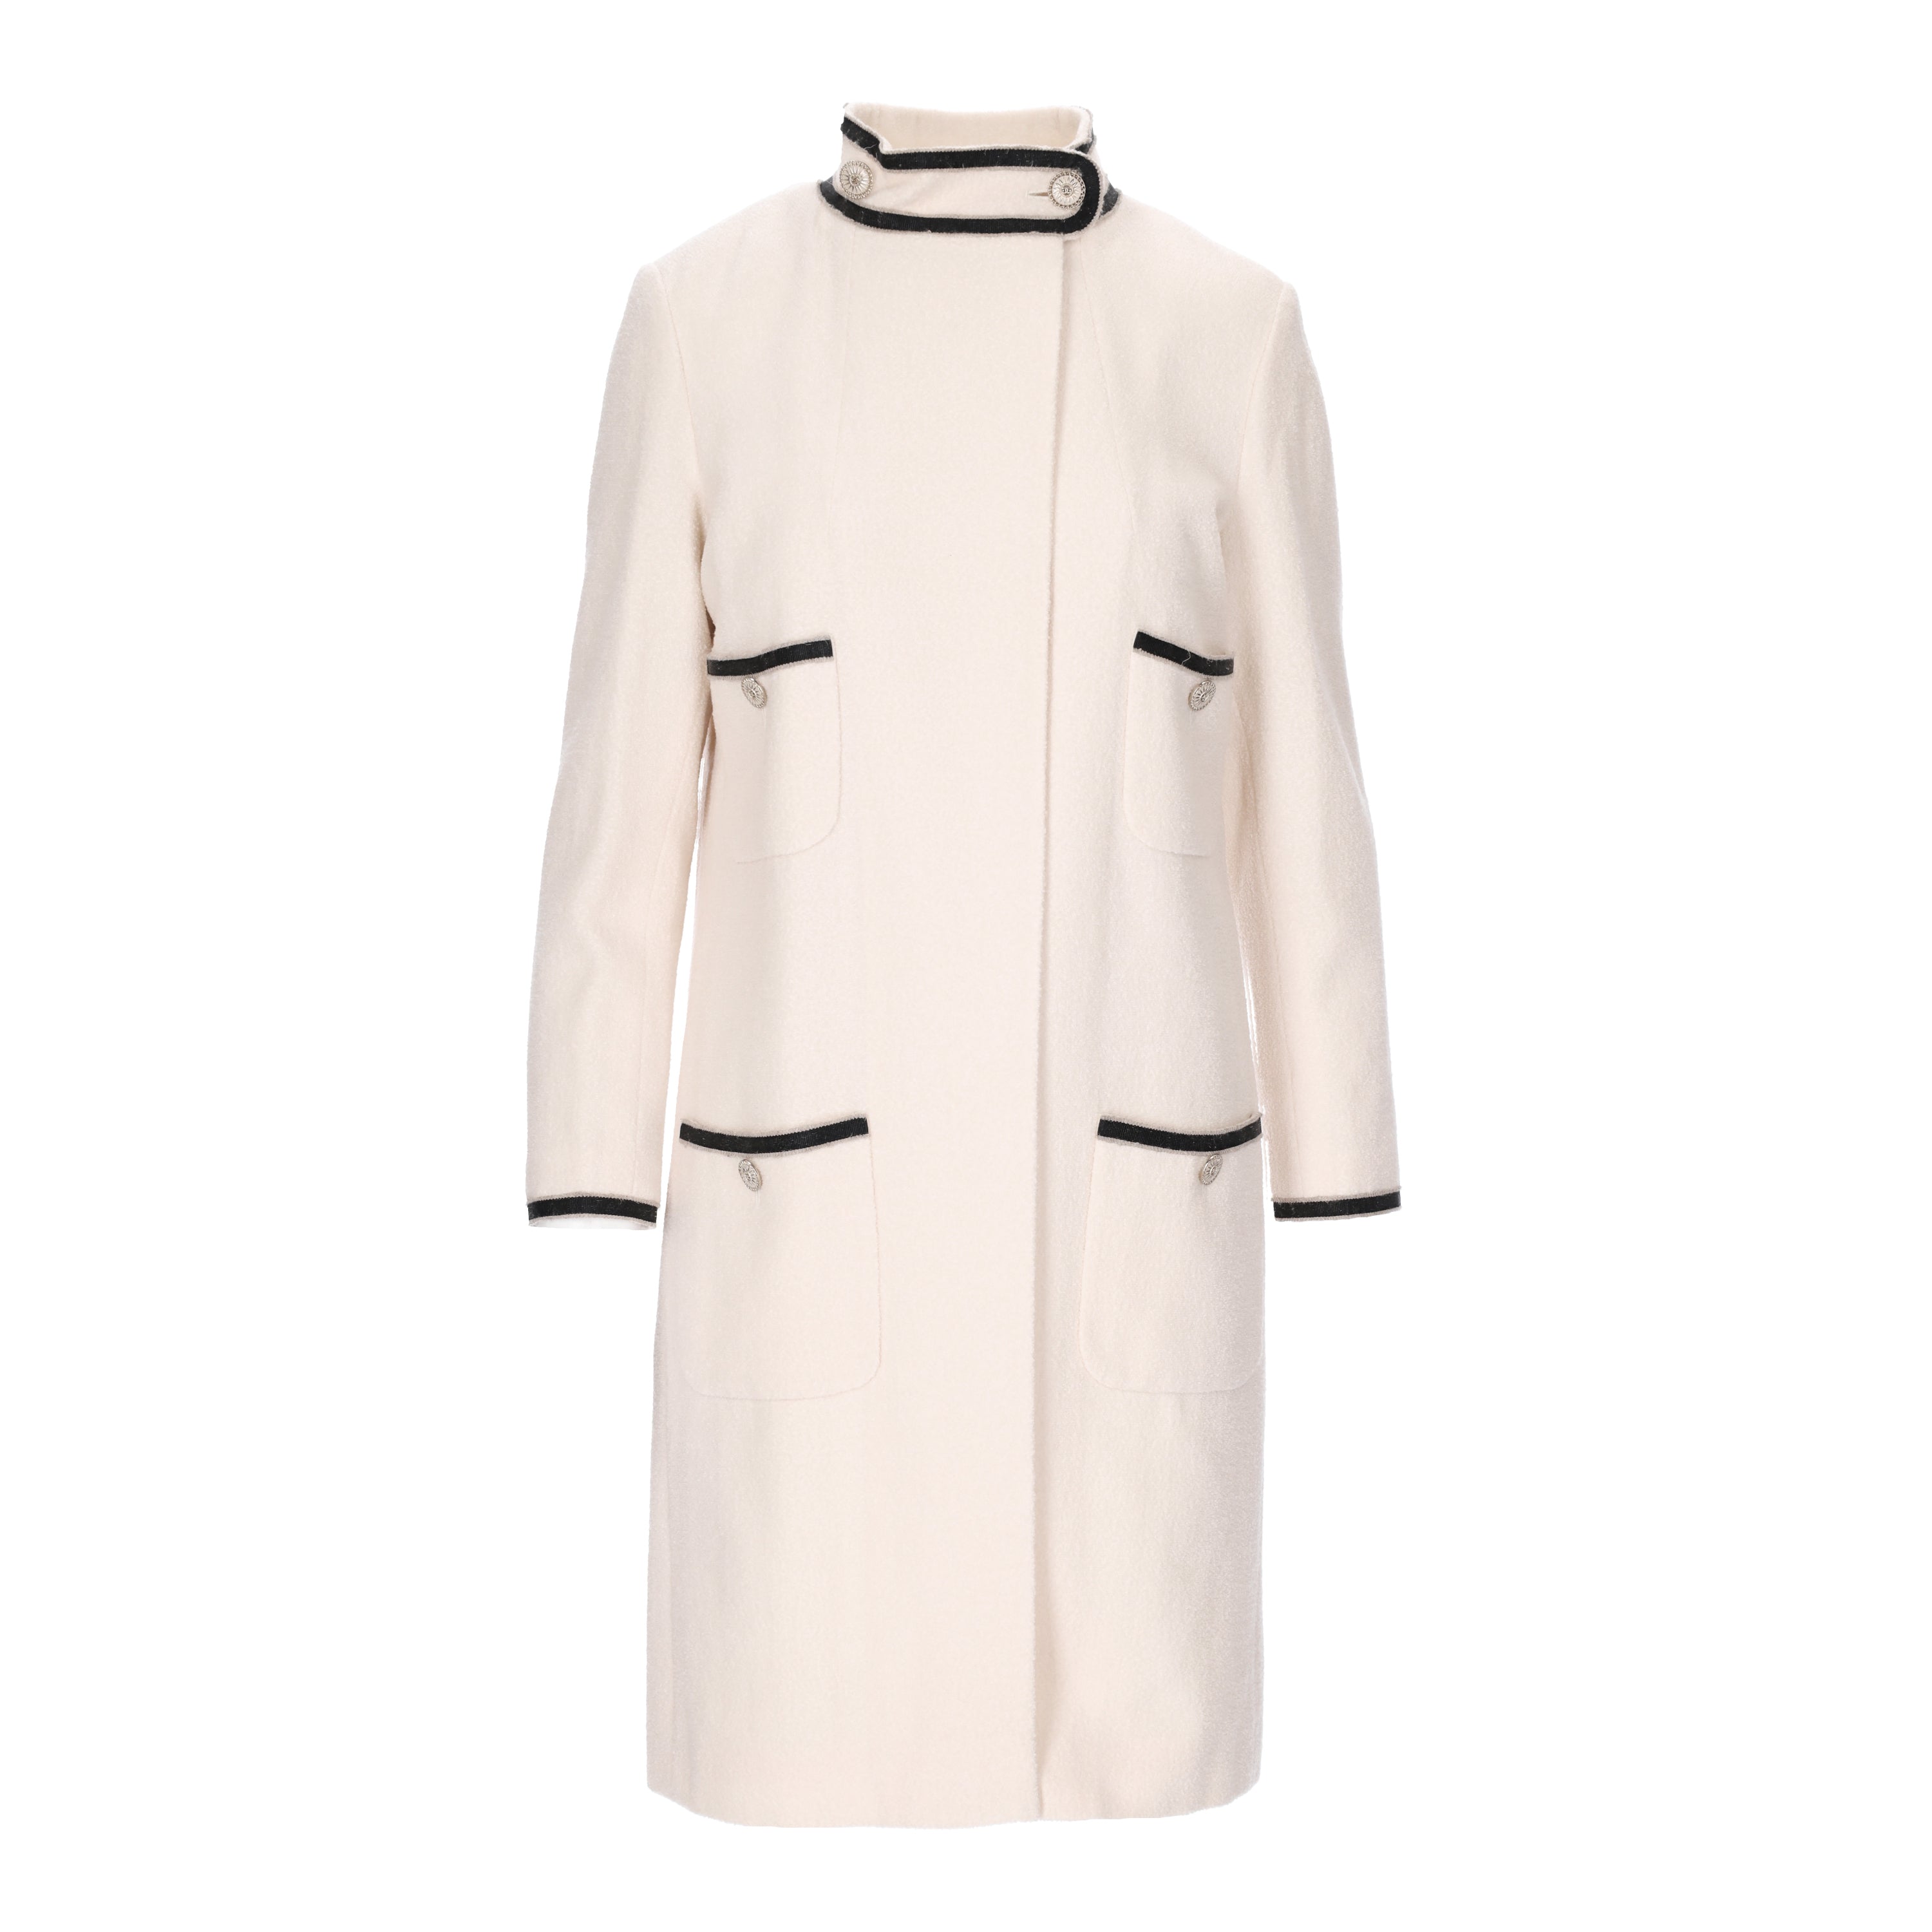 Chanel High Neck Wool Coat Second-hand